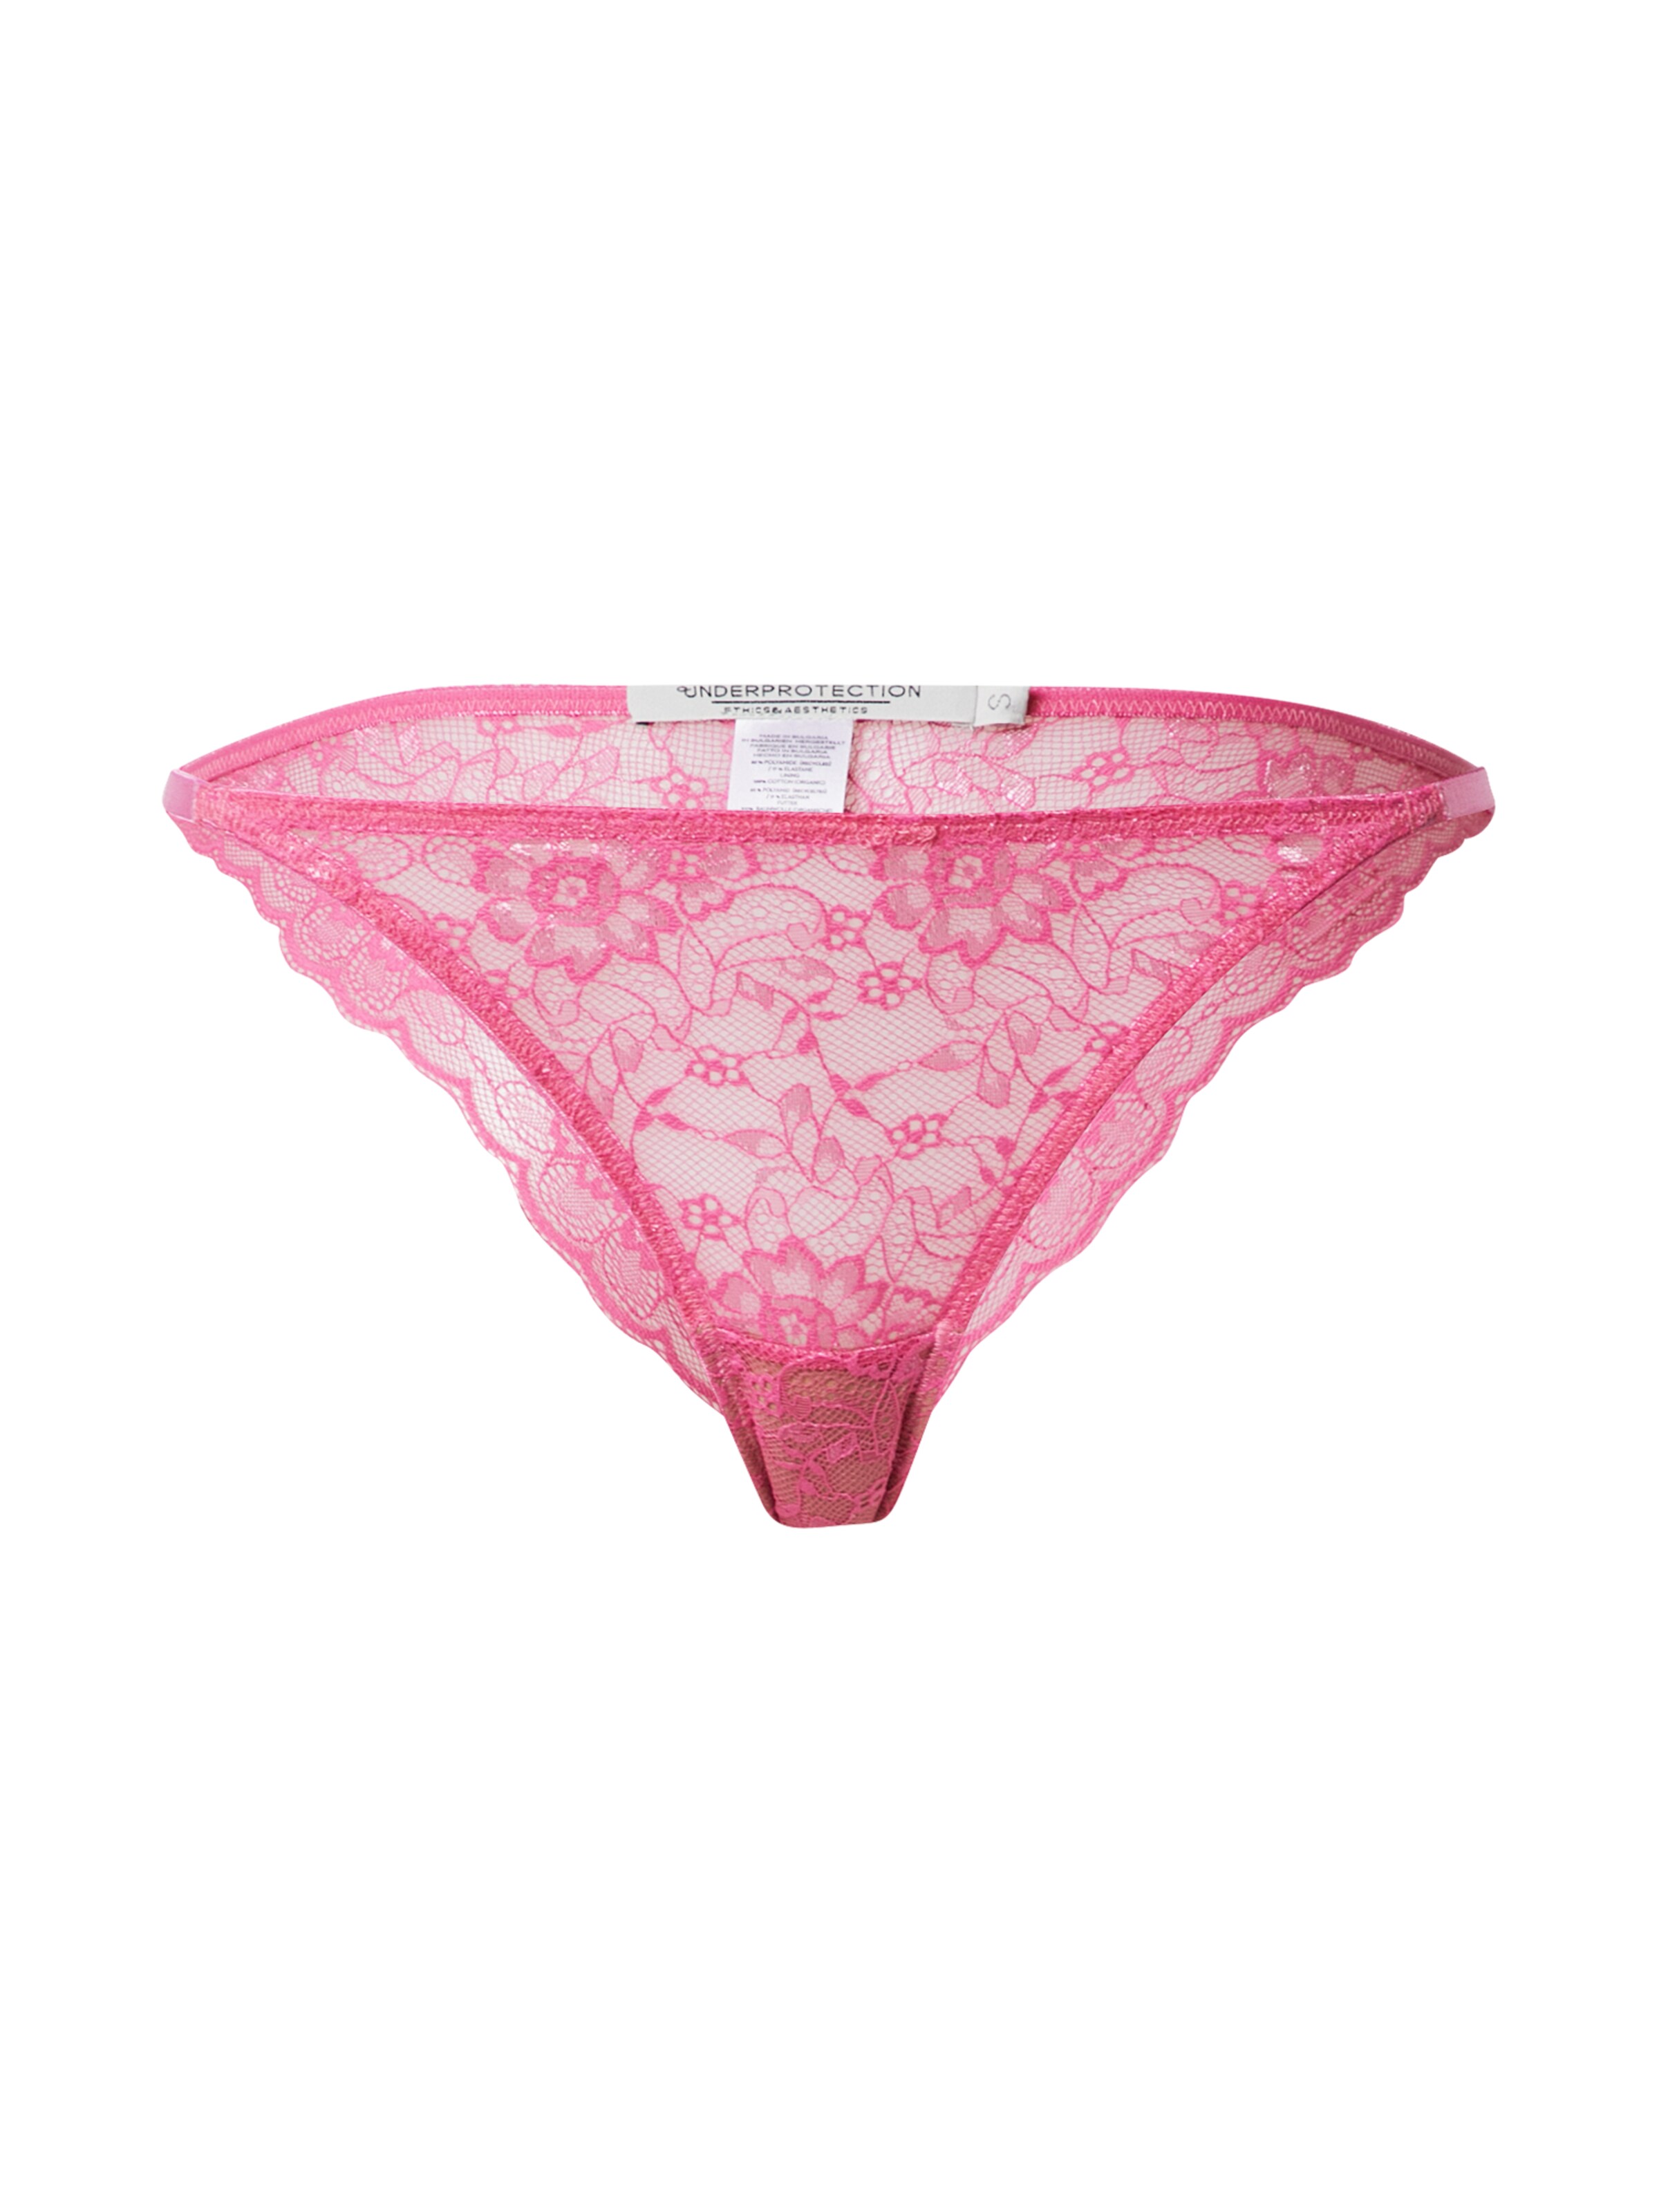 PgTnu Donna Underprotection Slip Amy in Rosa 